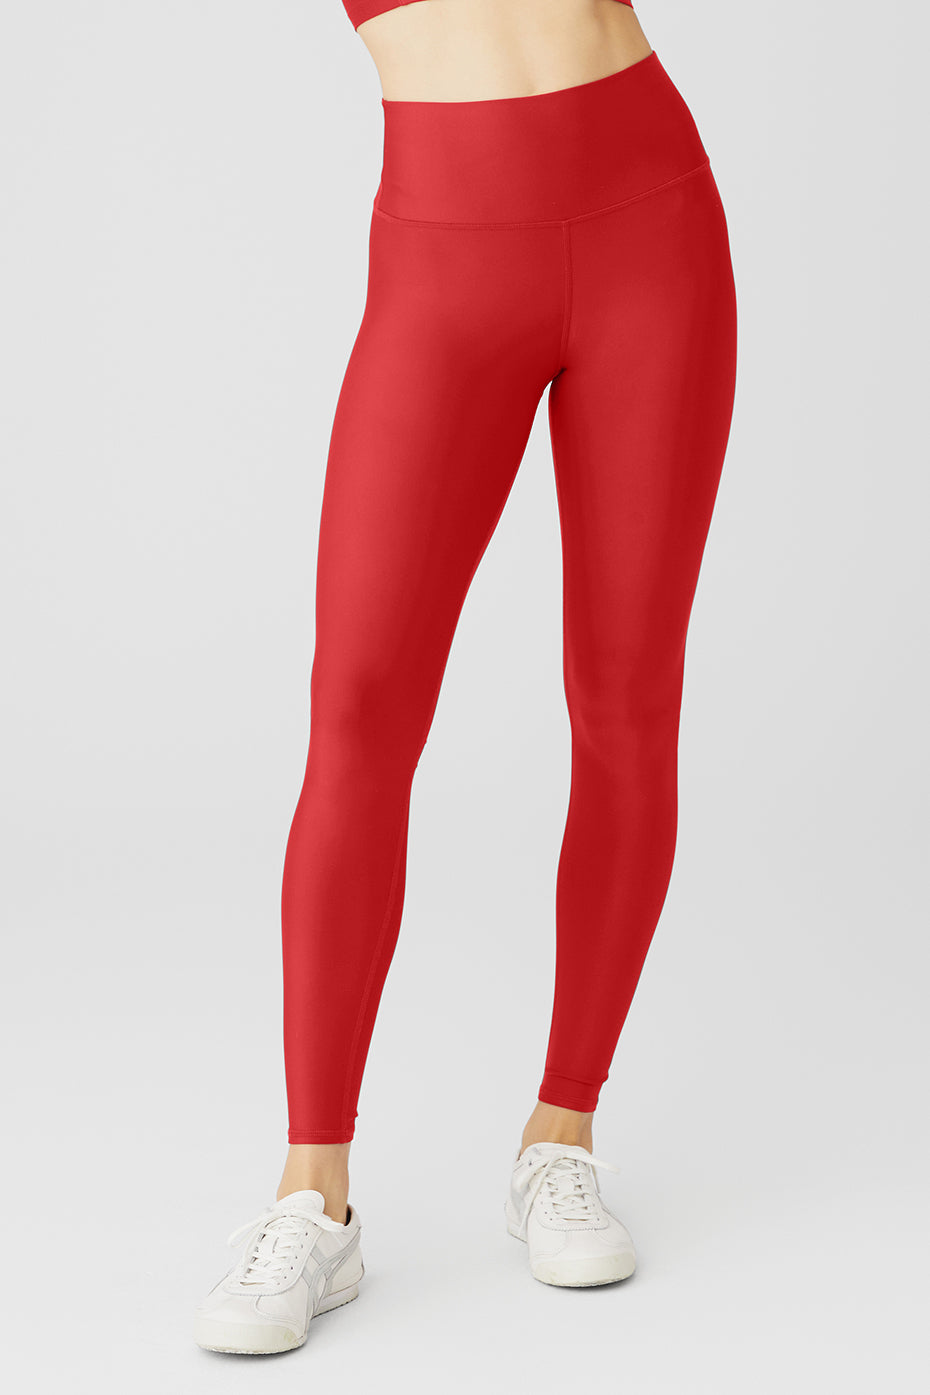 iHPH7 Leggings for Women high Waisted Leggings Sports Hip Tight Compression  Hollow Quick-Drying Fitness Yoga Slim Nine Pants (L,Red) at  Women's  Clothing store